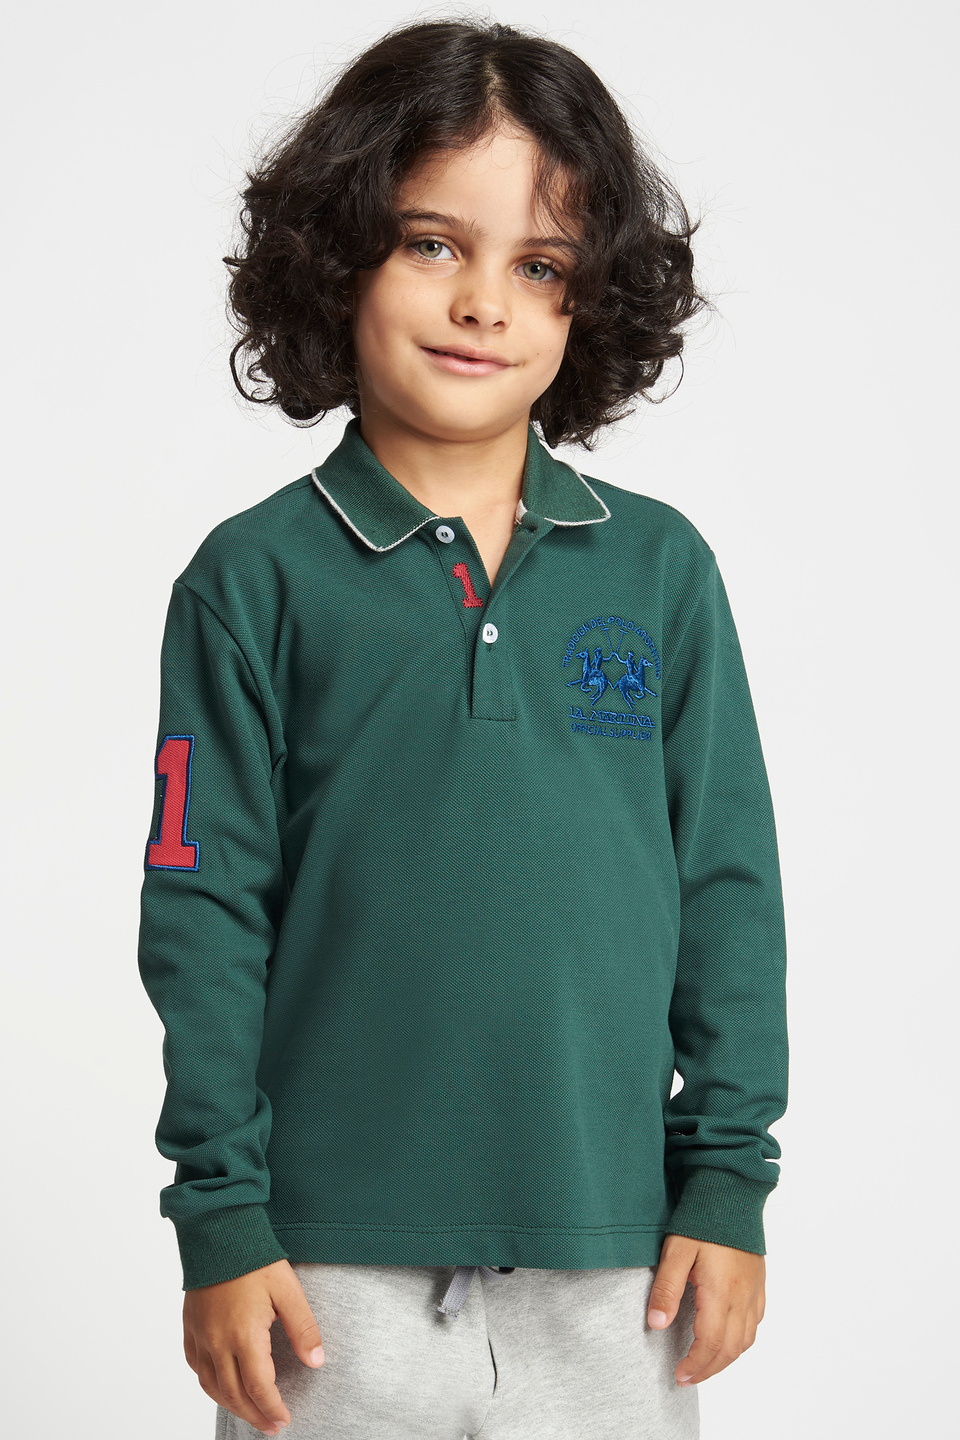 Plain-coloured long-sleeved polo shirt with band detail | La Martina - Official Online Shop